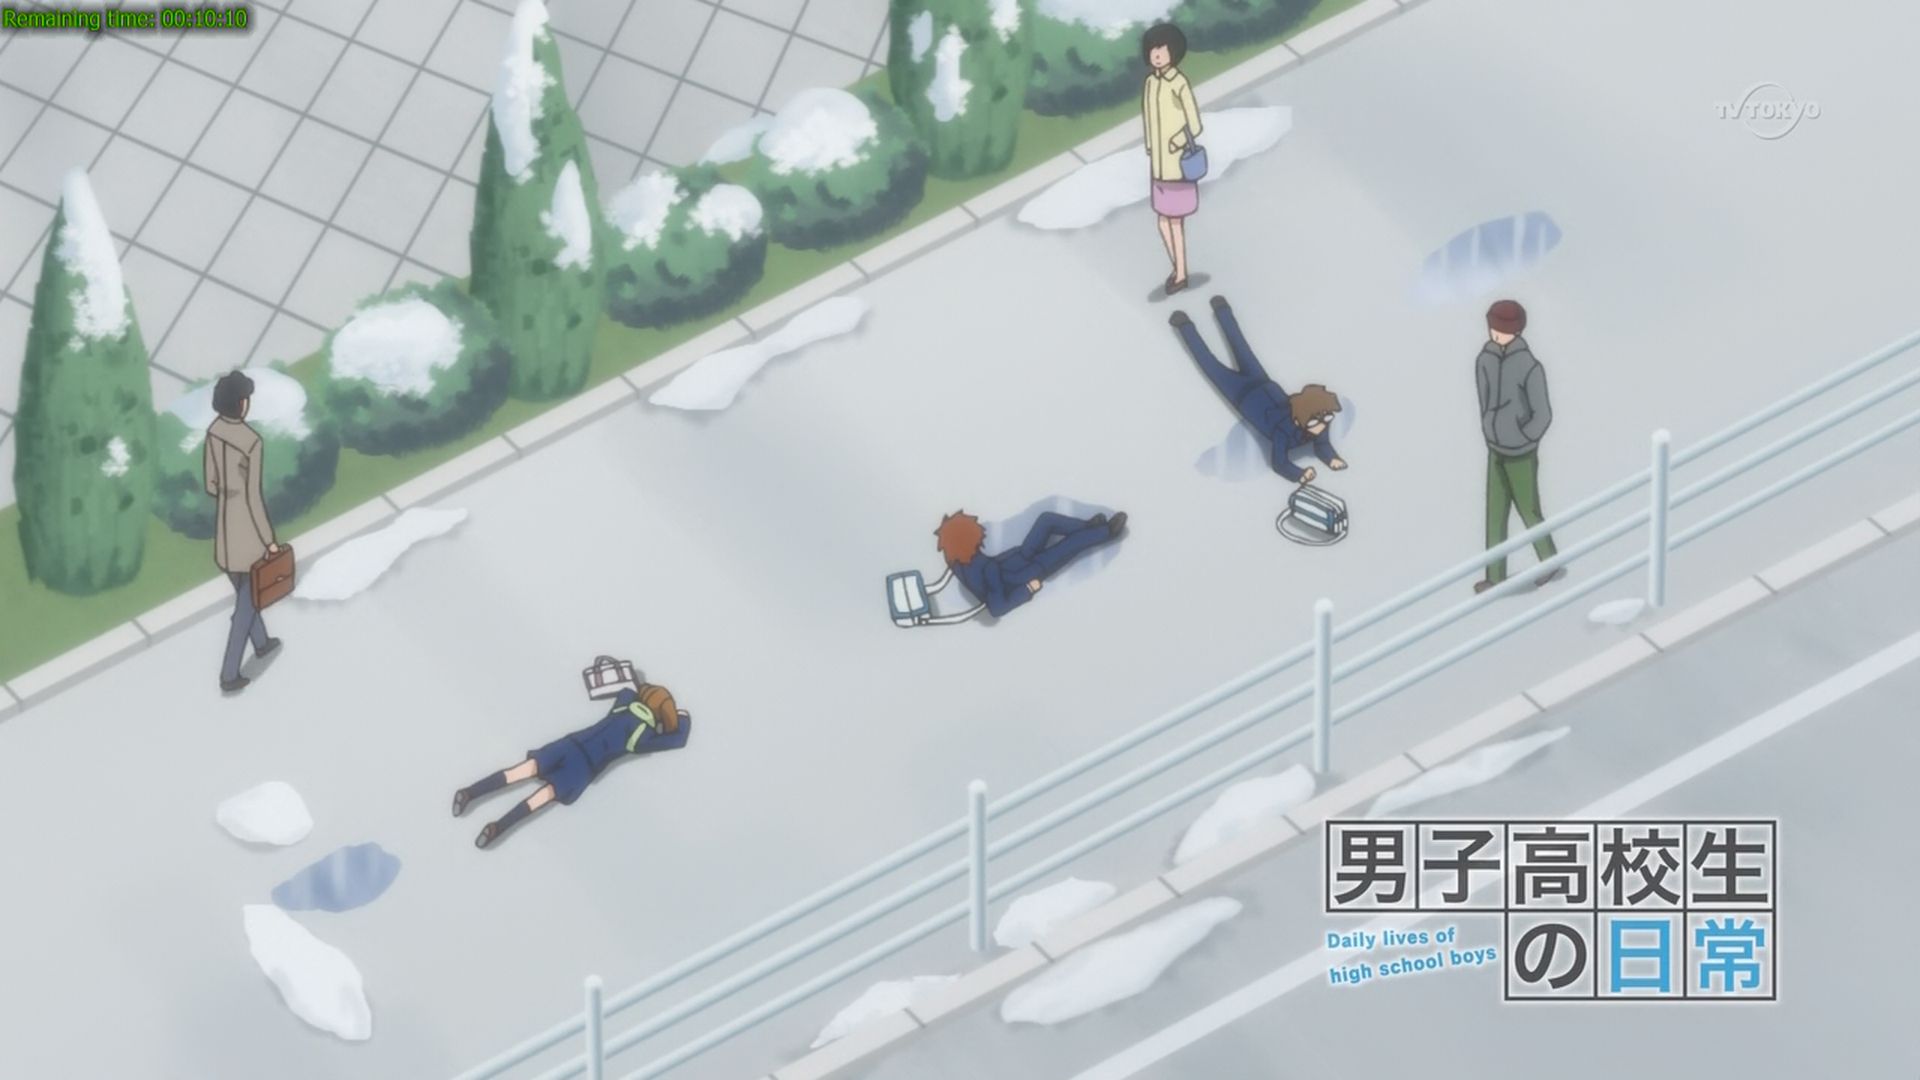 Want to know how those three characters ends up on the ground? Watch this seriesd then!